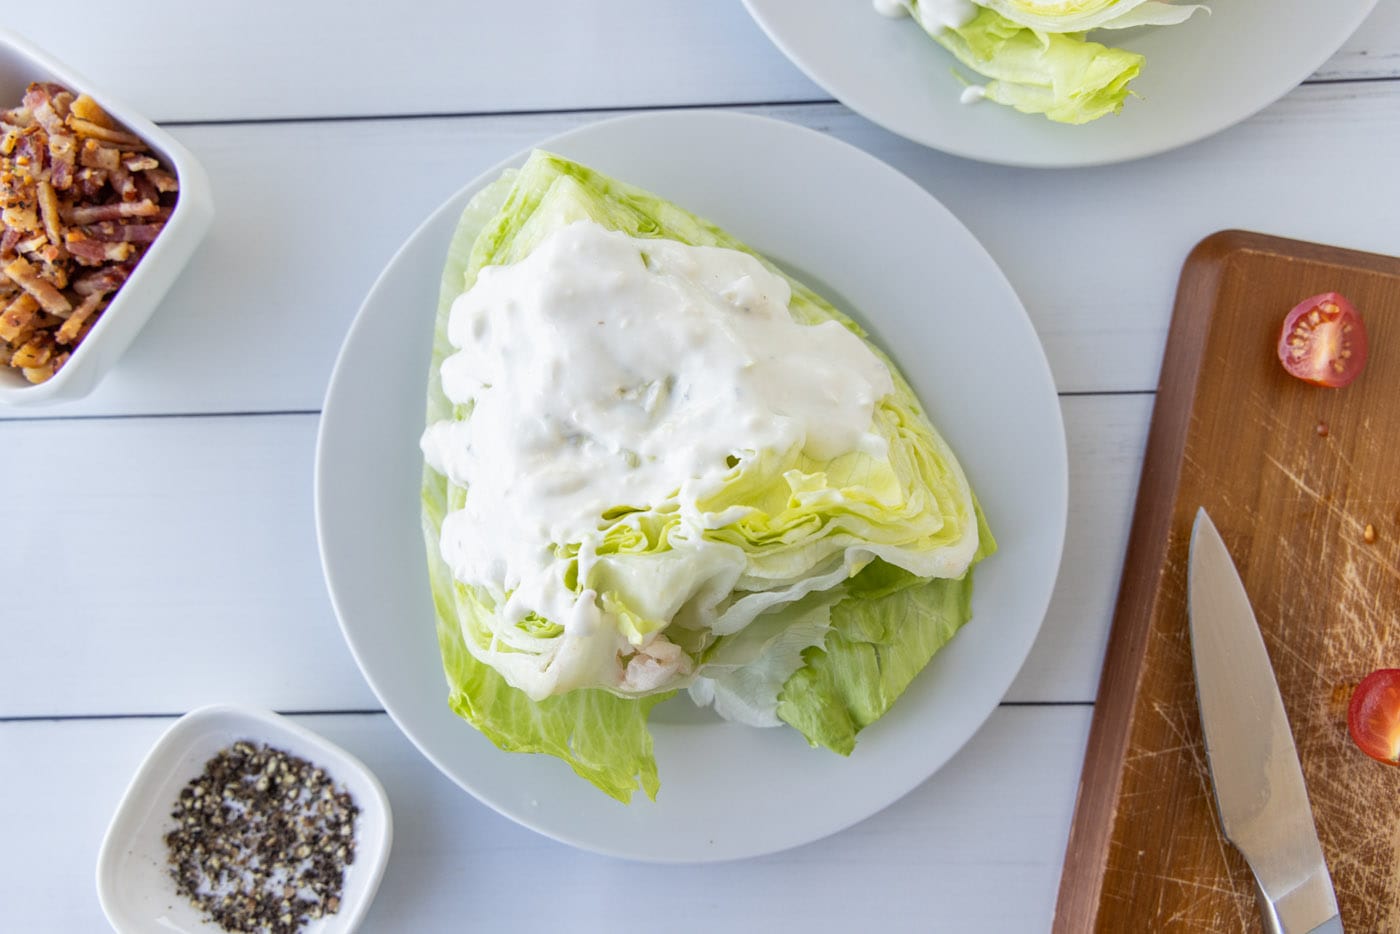 bleu cheese dressing on top of wedge salad